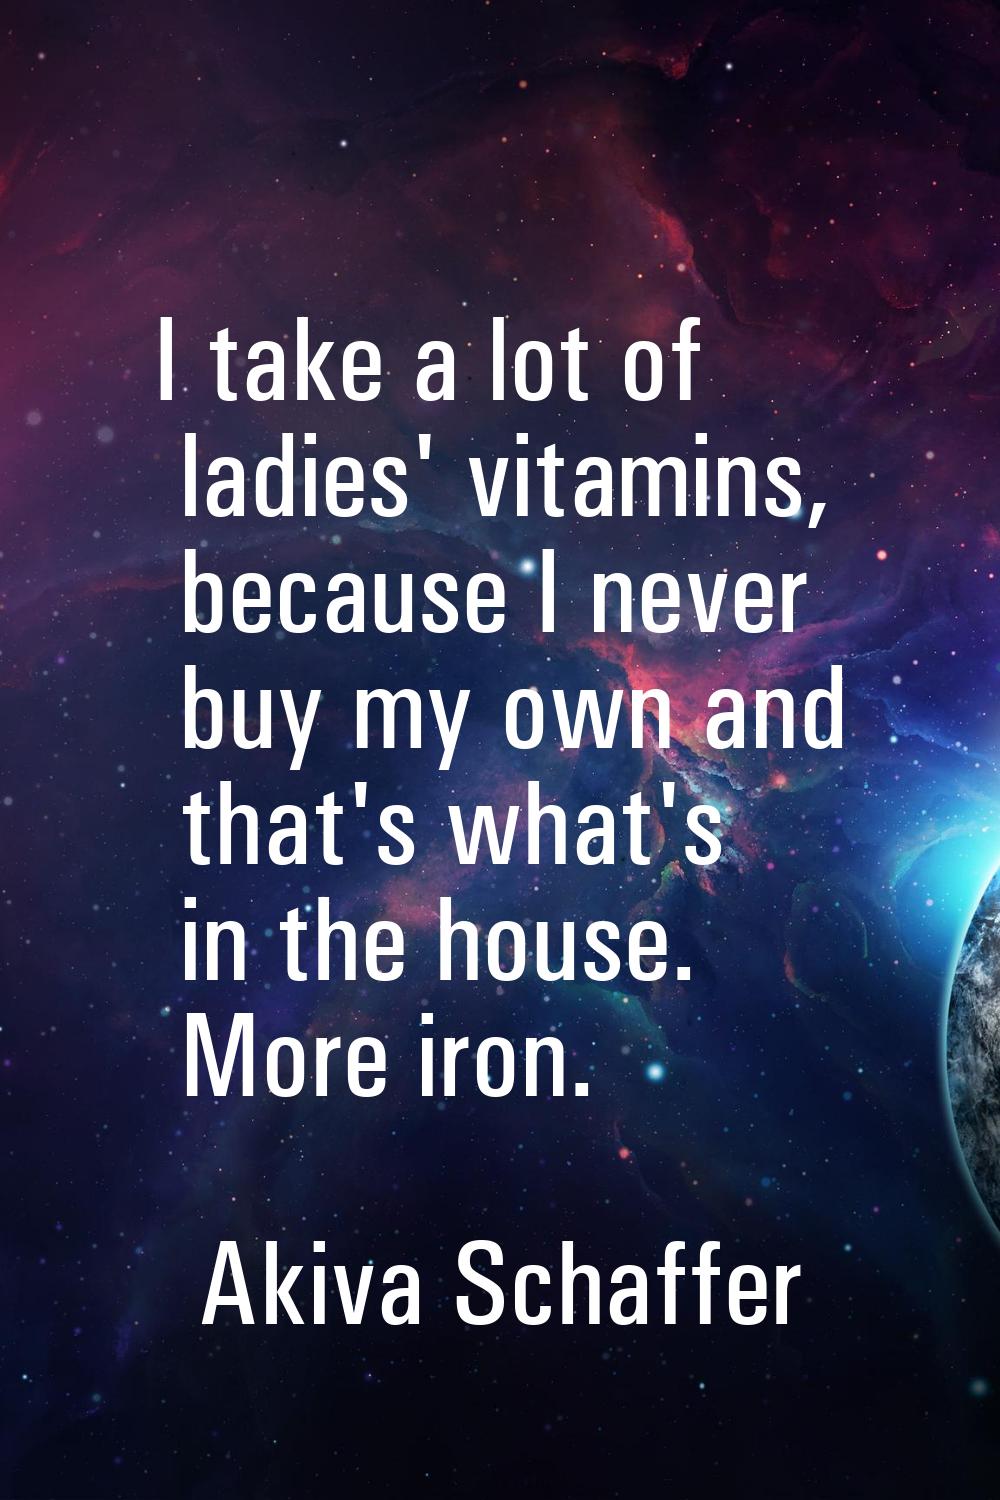 I take a lot of ladies' vitamins, because I never buy my own and that's what's in the house. More i